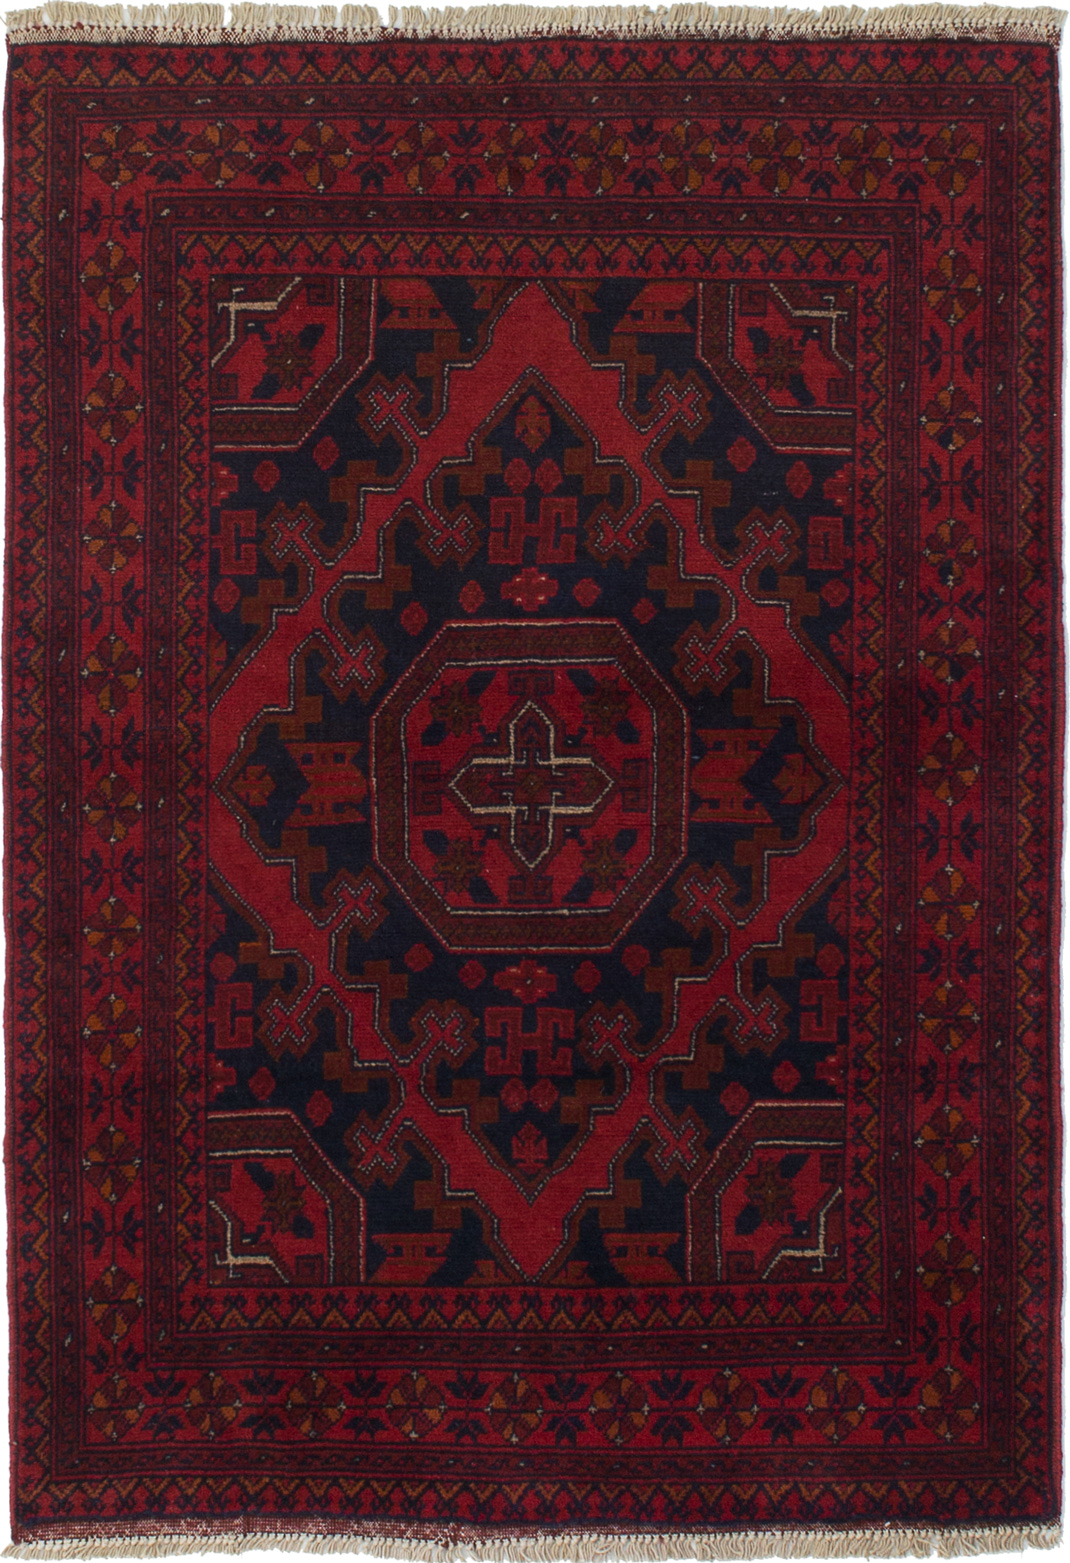 Hand-knotted Finest Khal Mohammadi Red Wool Rug 3'5" x 4'8"  Size: 3'5" x 4'8"  